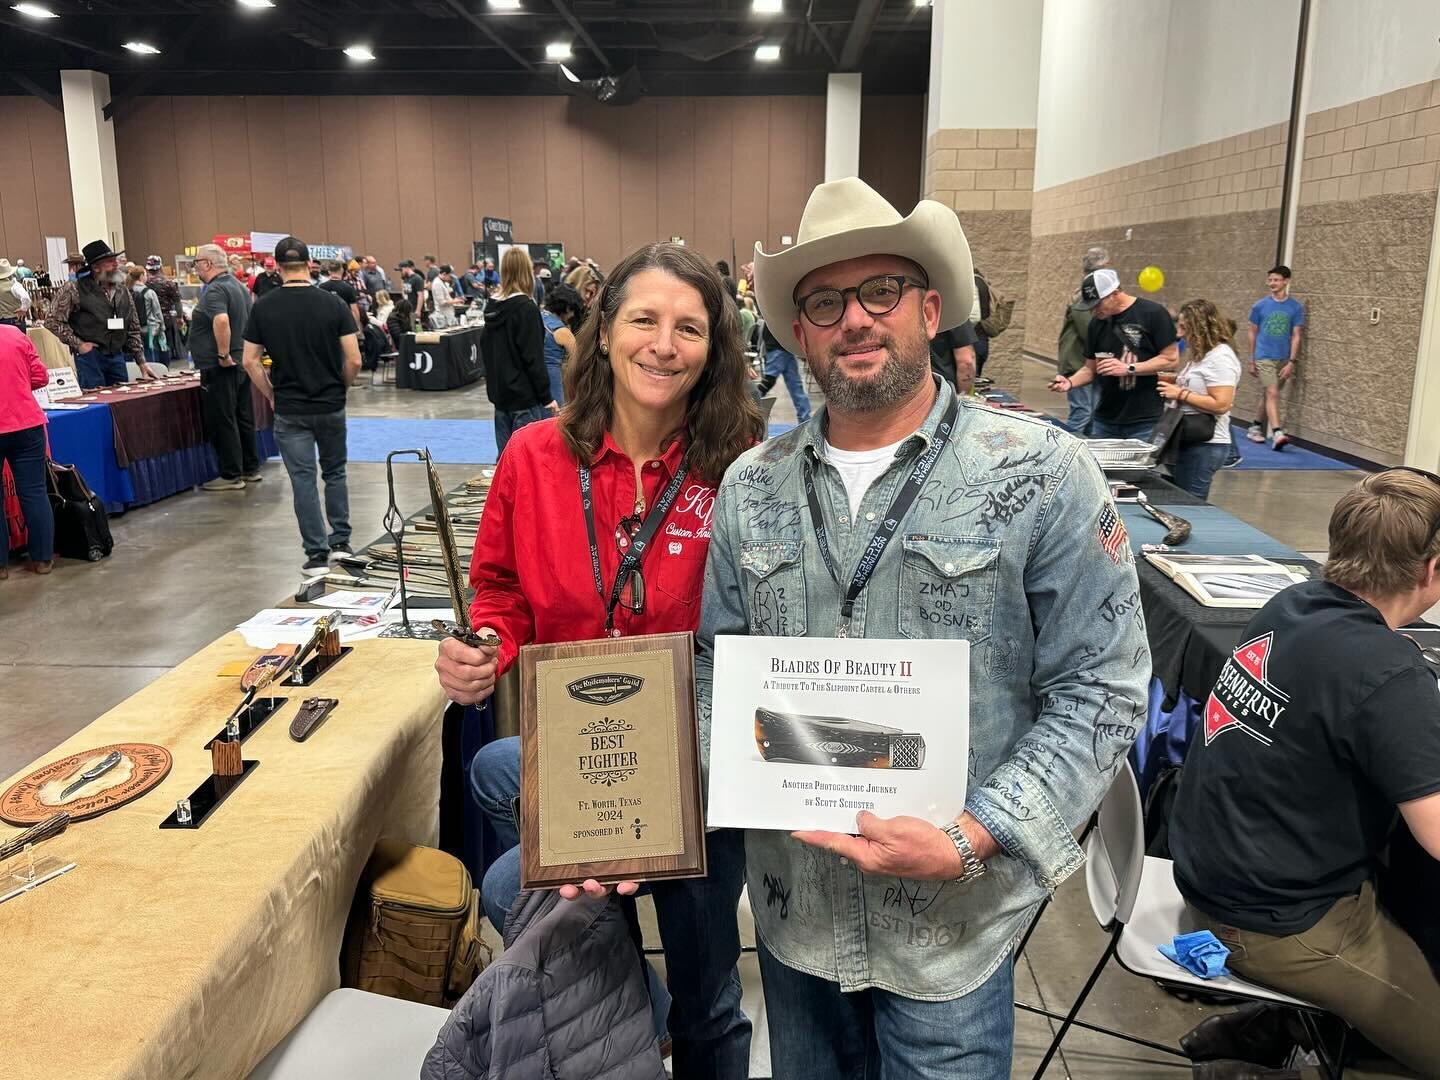 @blade_show Texas with @kellyvermeervella.knives ! Congratulations on your win ! Proud to have you in Blades of Beauty 2 !